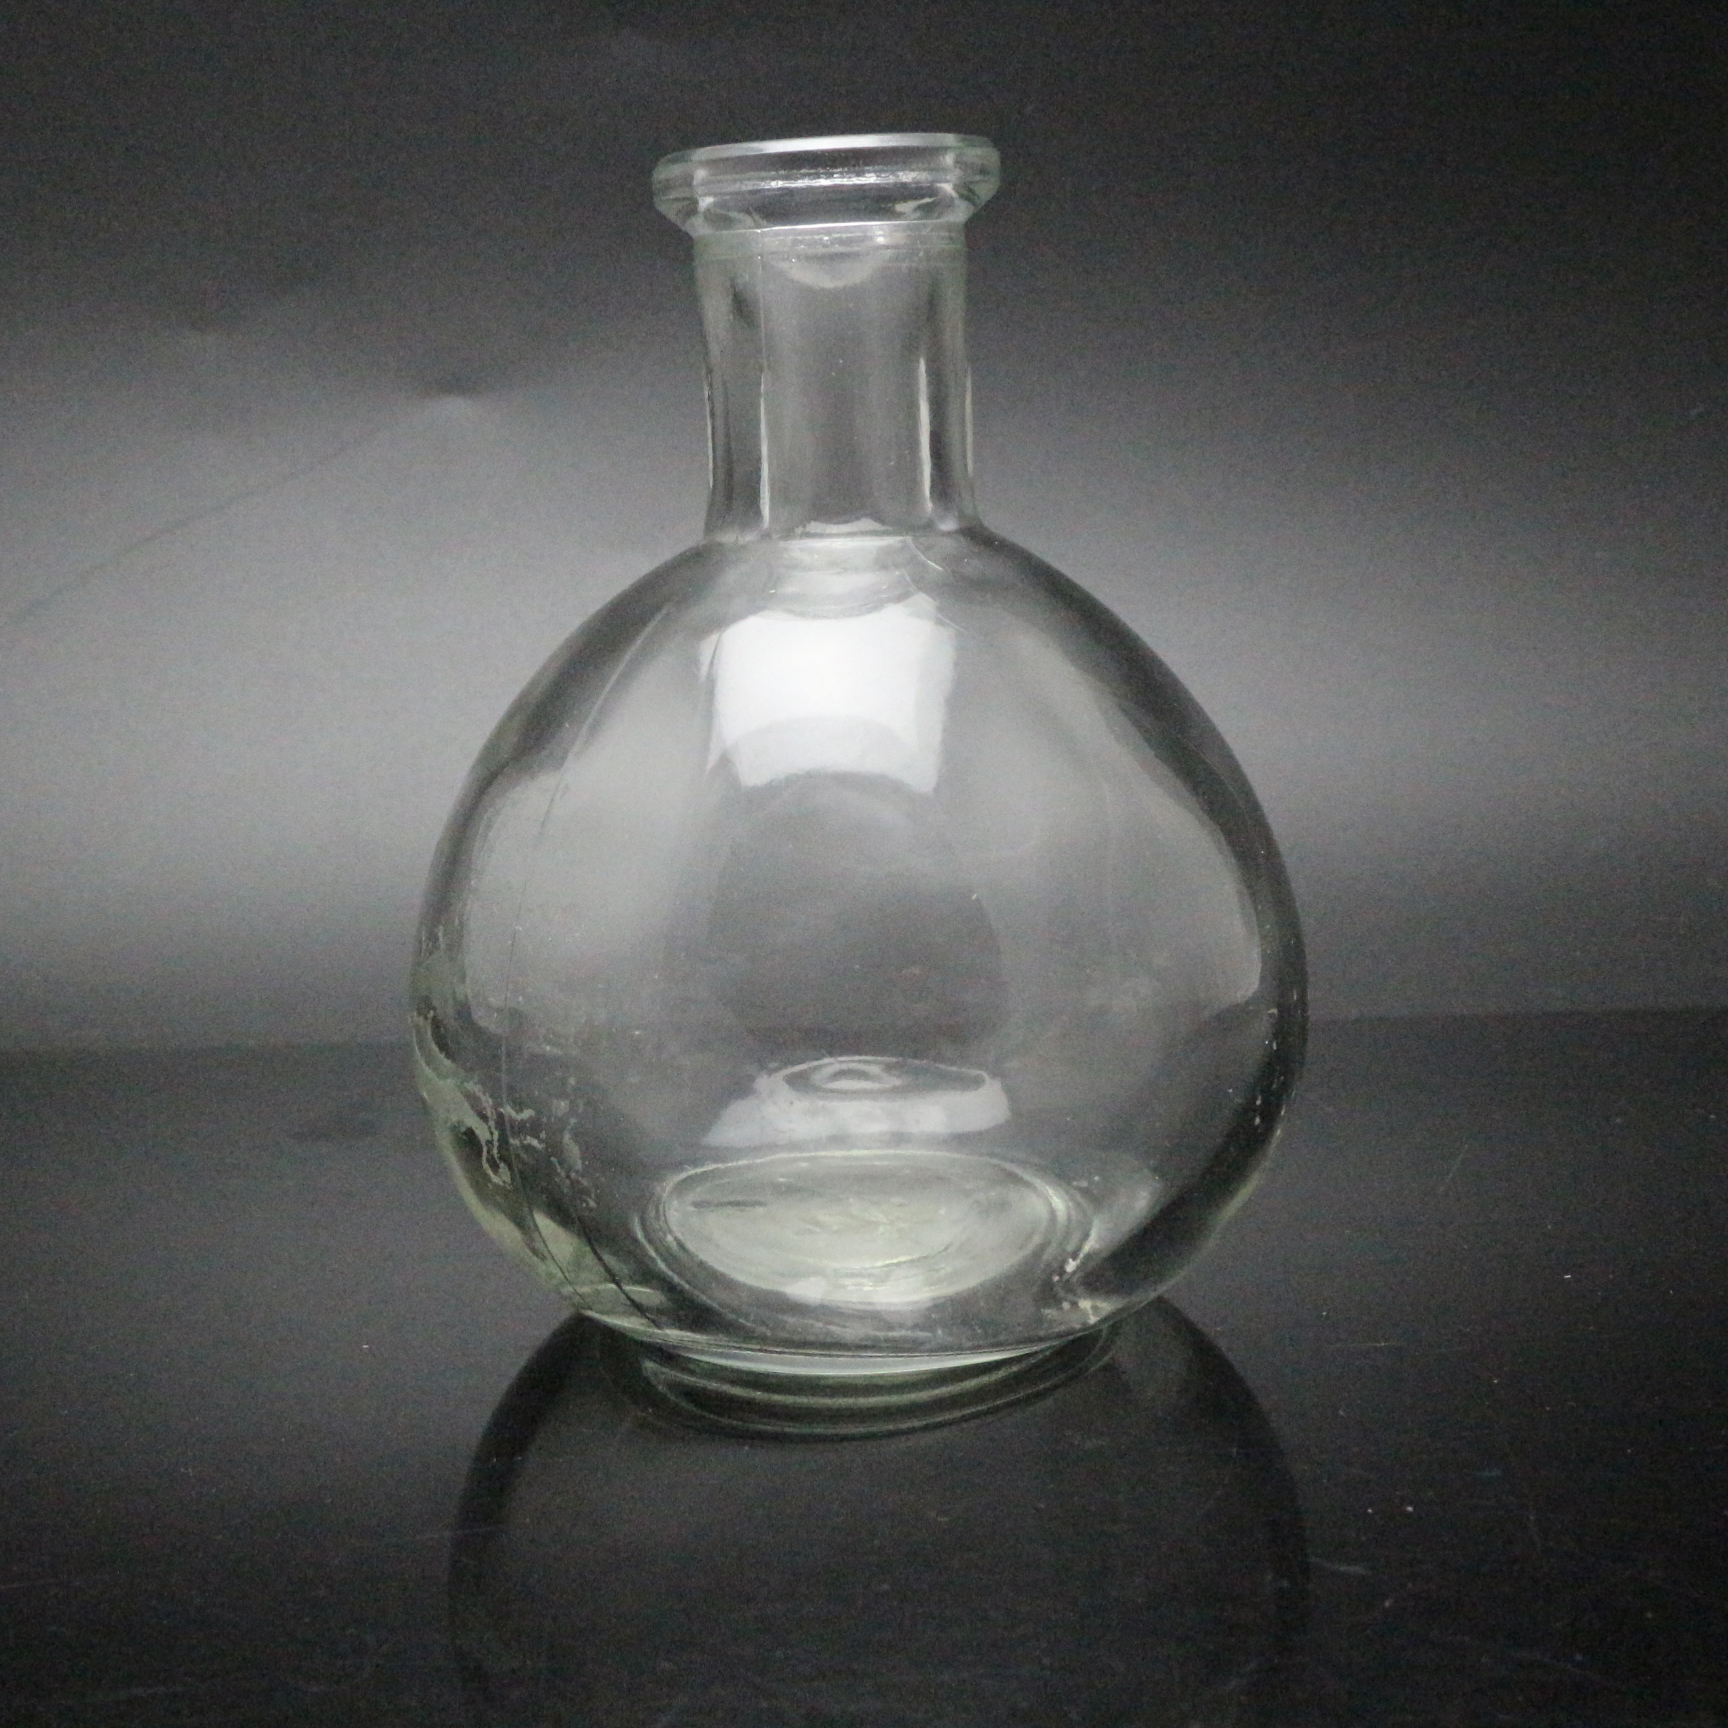 Hand Crafted Glass Liquid Decanter with Stopper Small 8 Ounce for perfume diffuser bottle